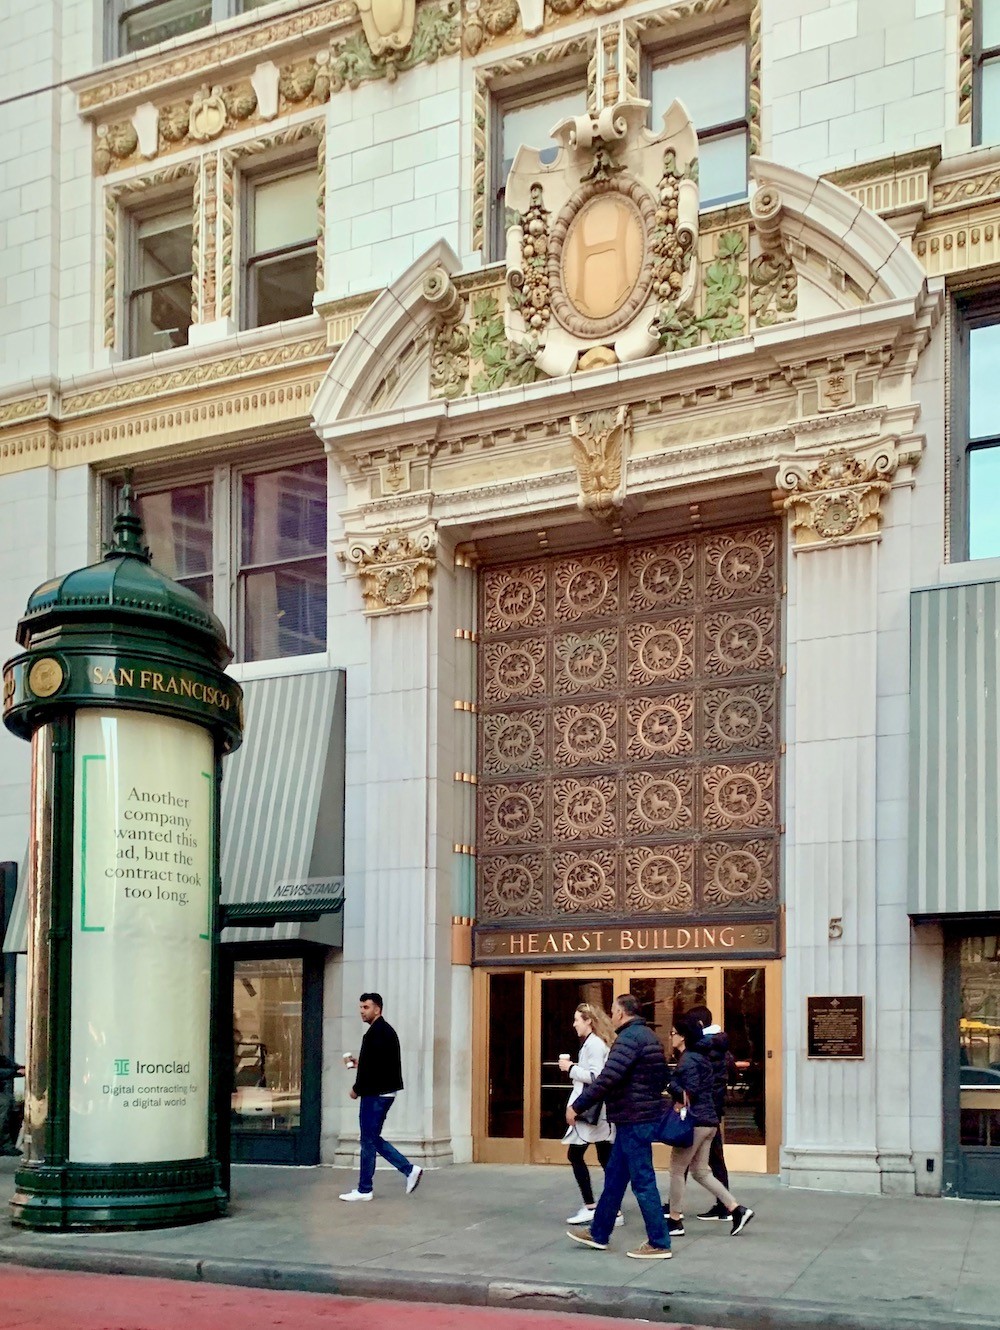 Classical Architecture in San Francisco - Hearst Building